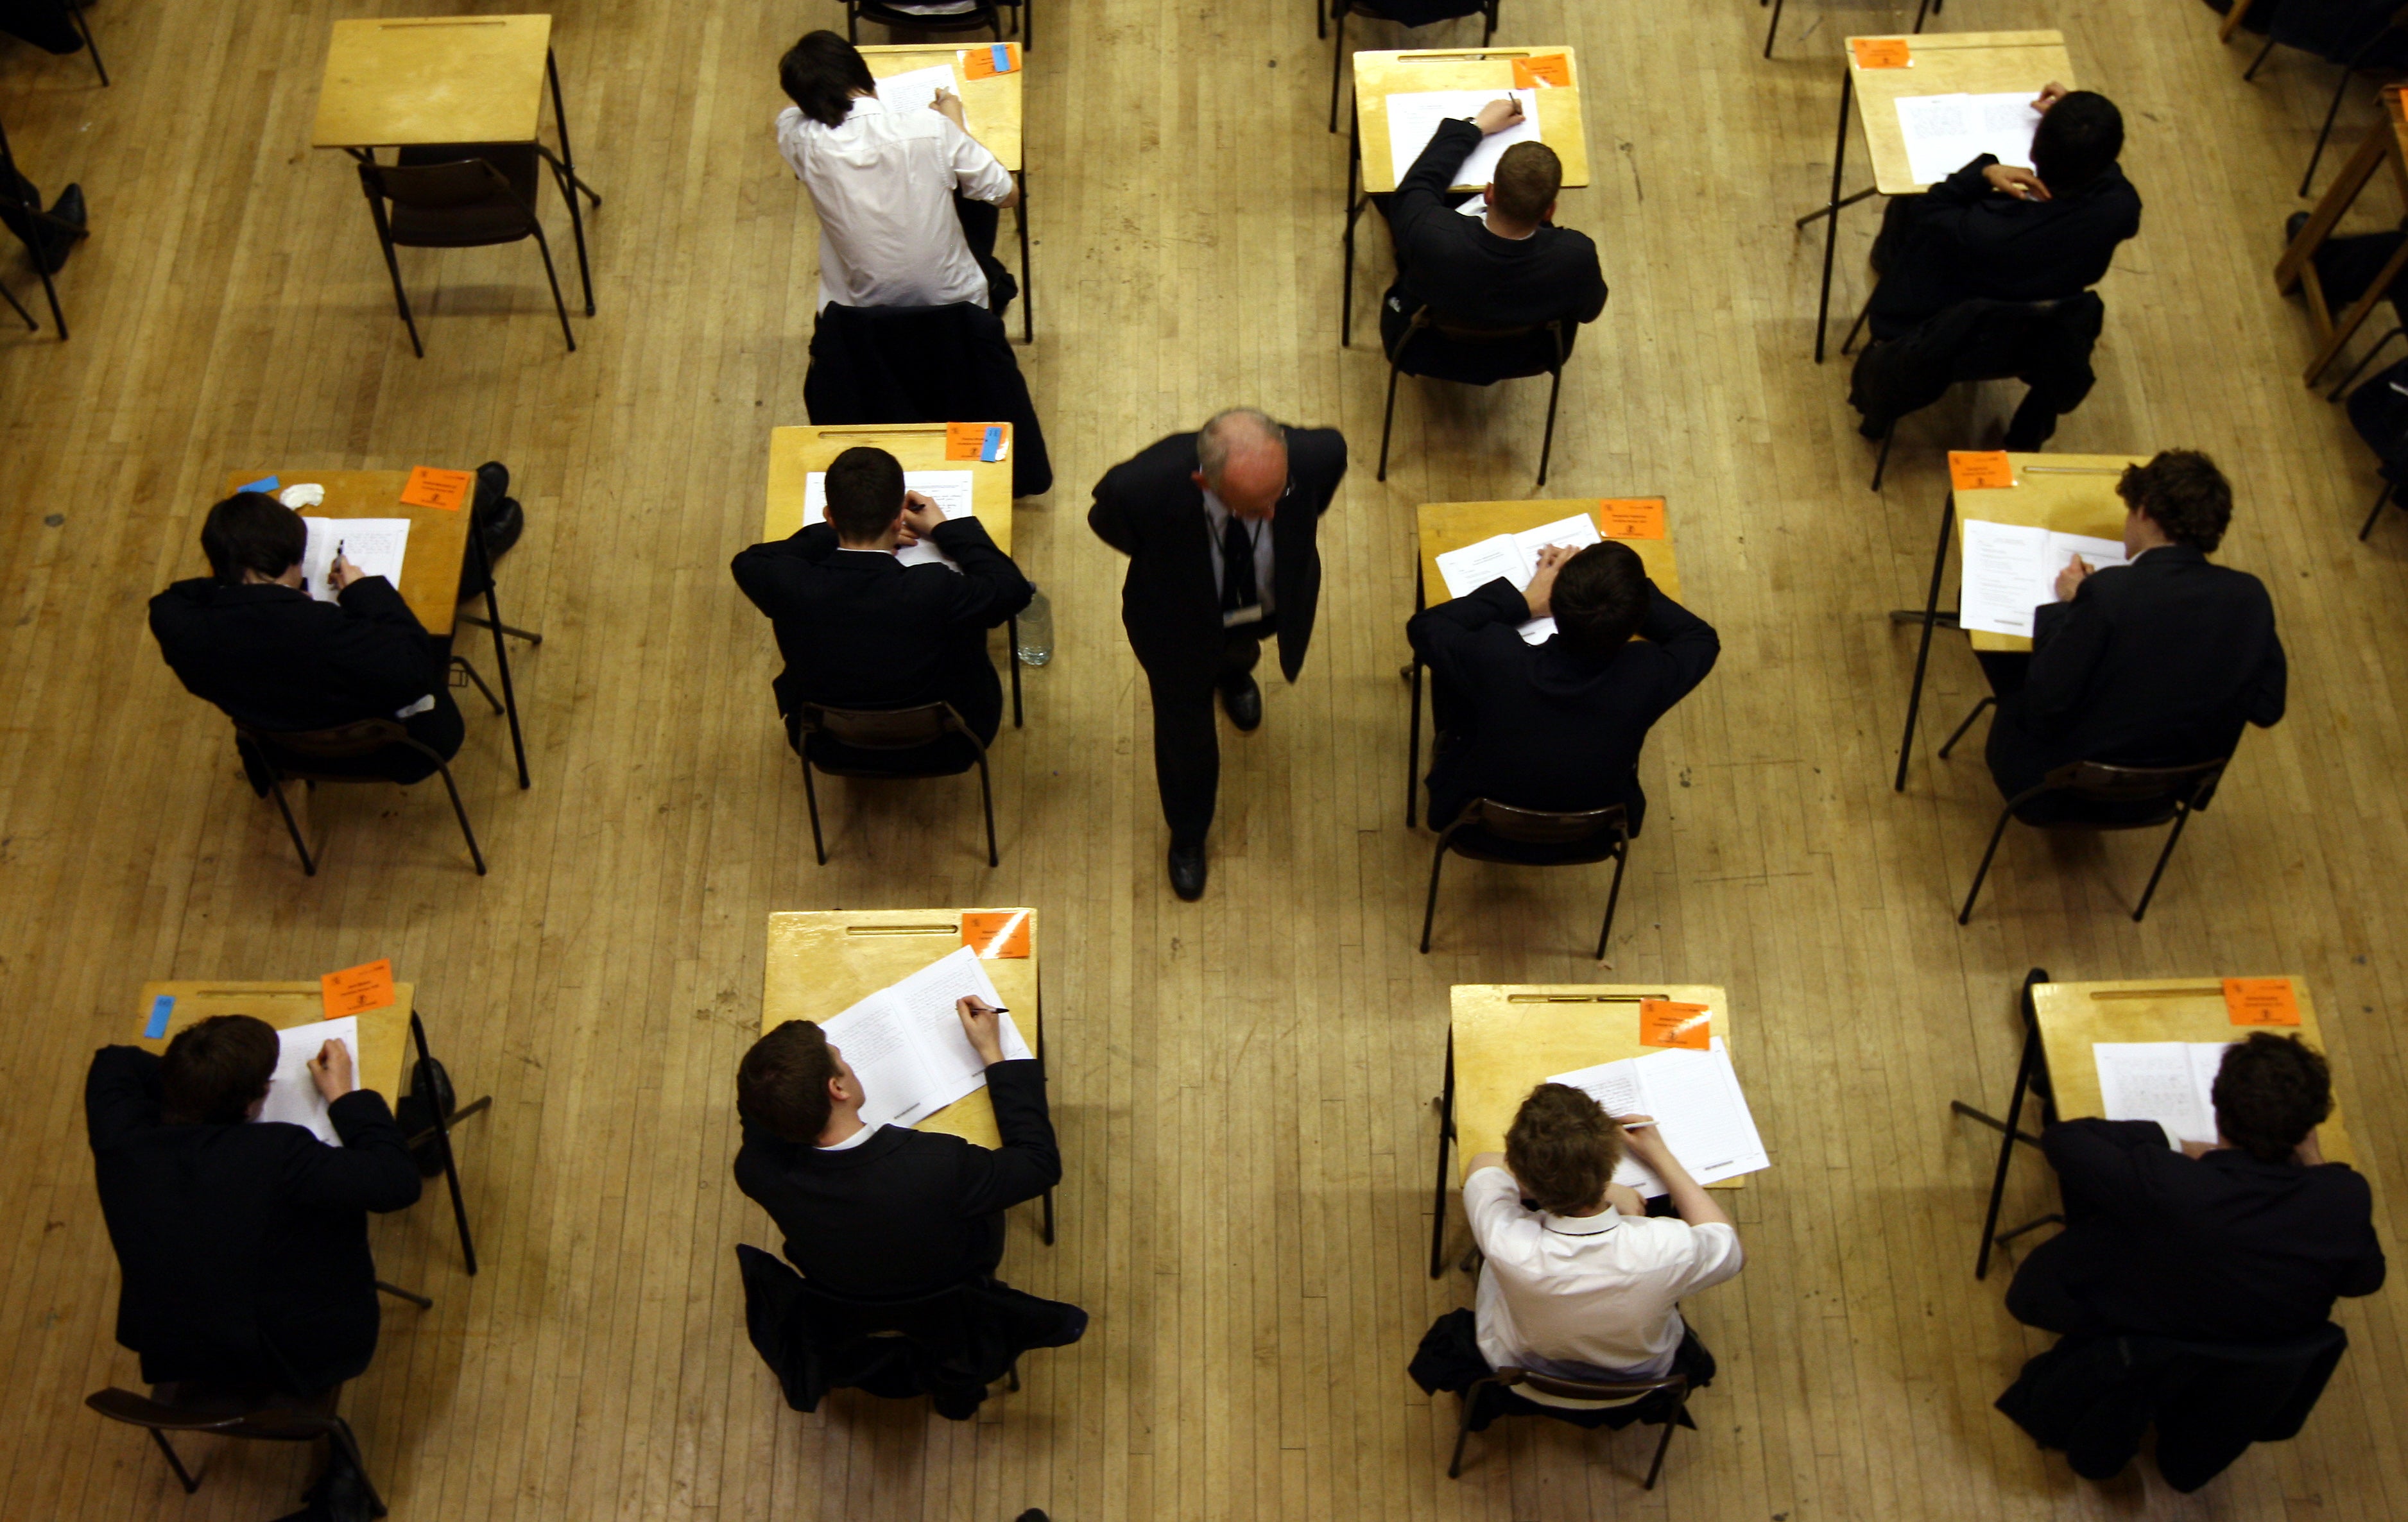 Schools became involved in marking exams during the pandemic